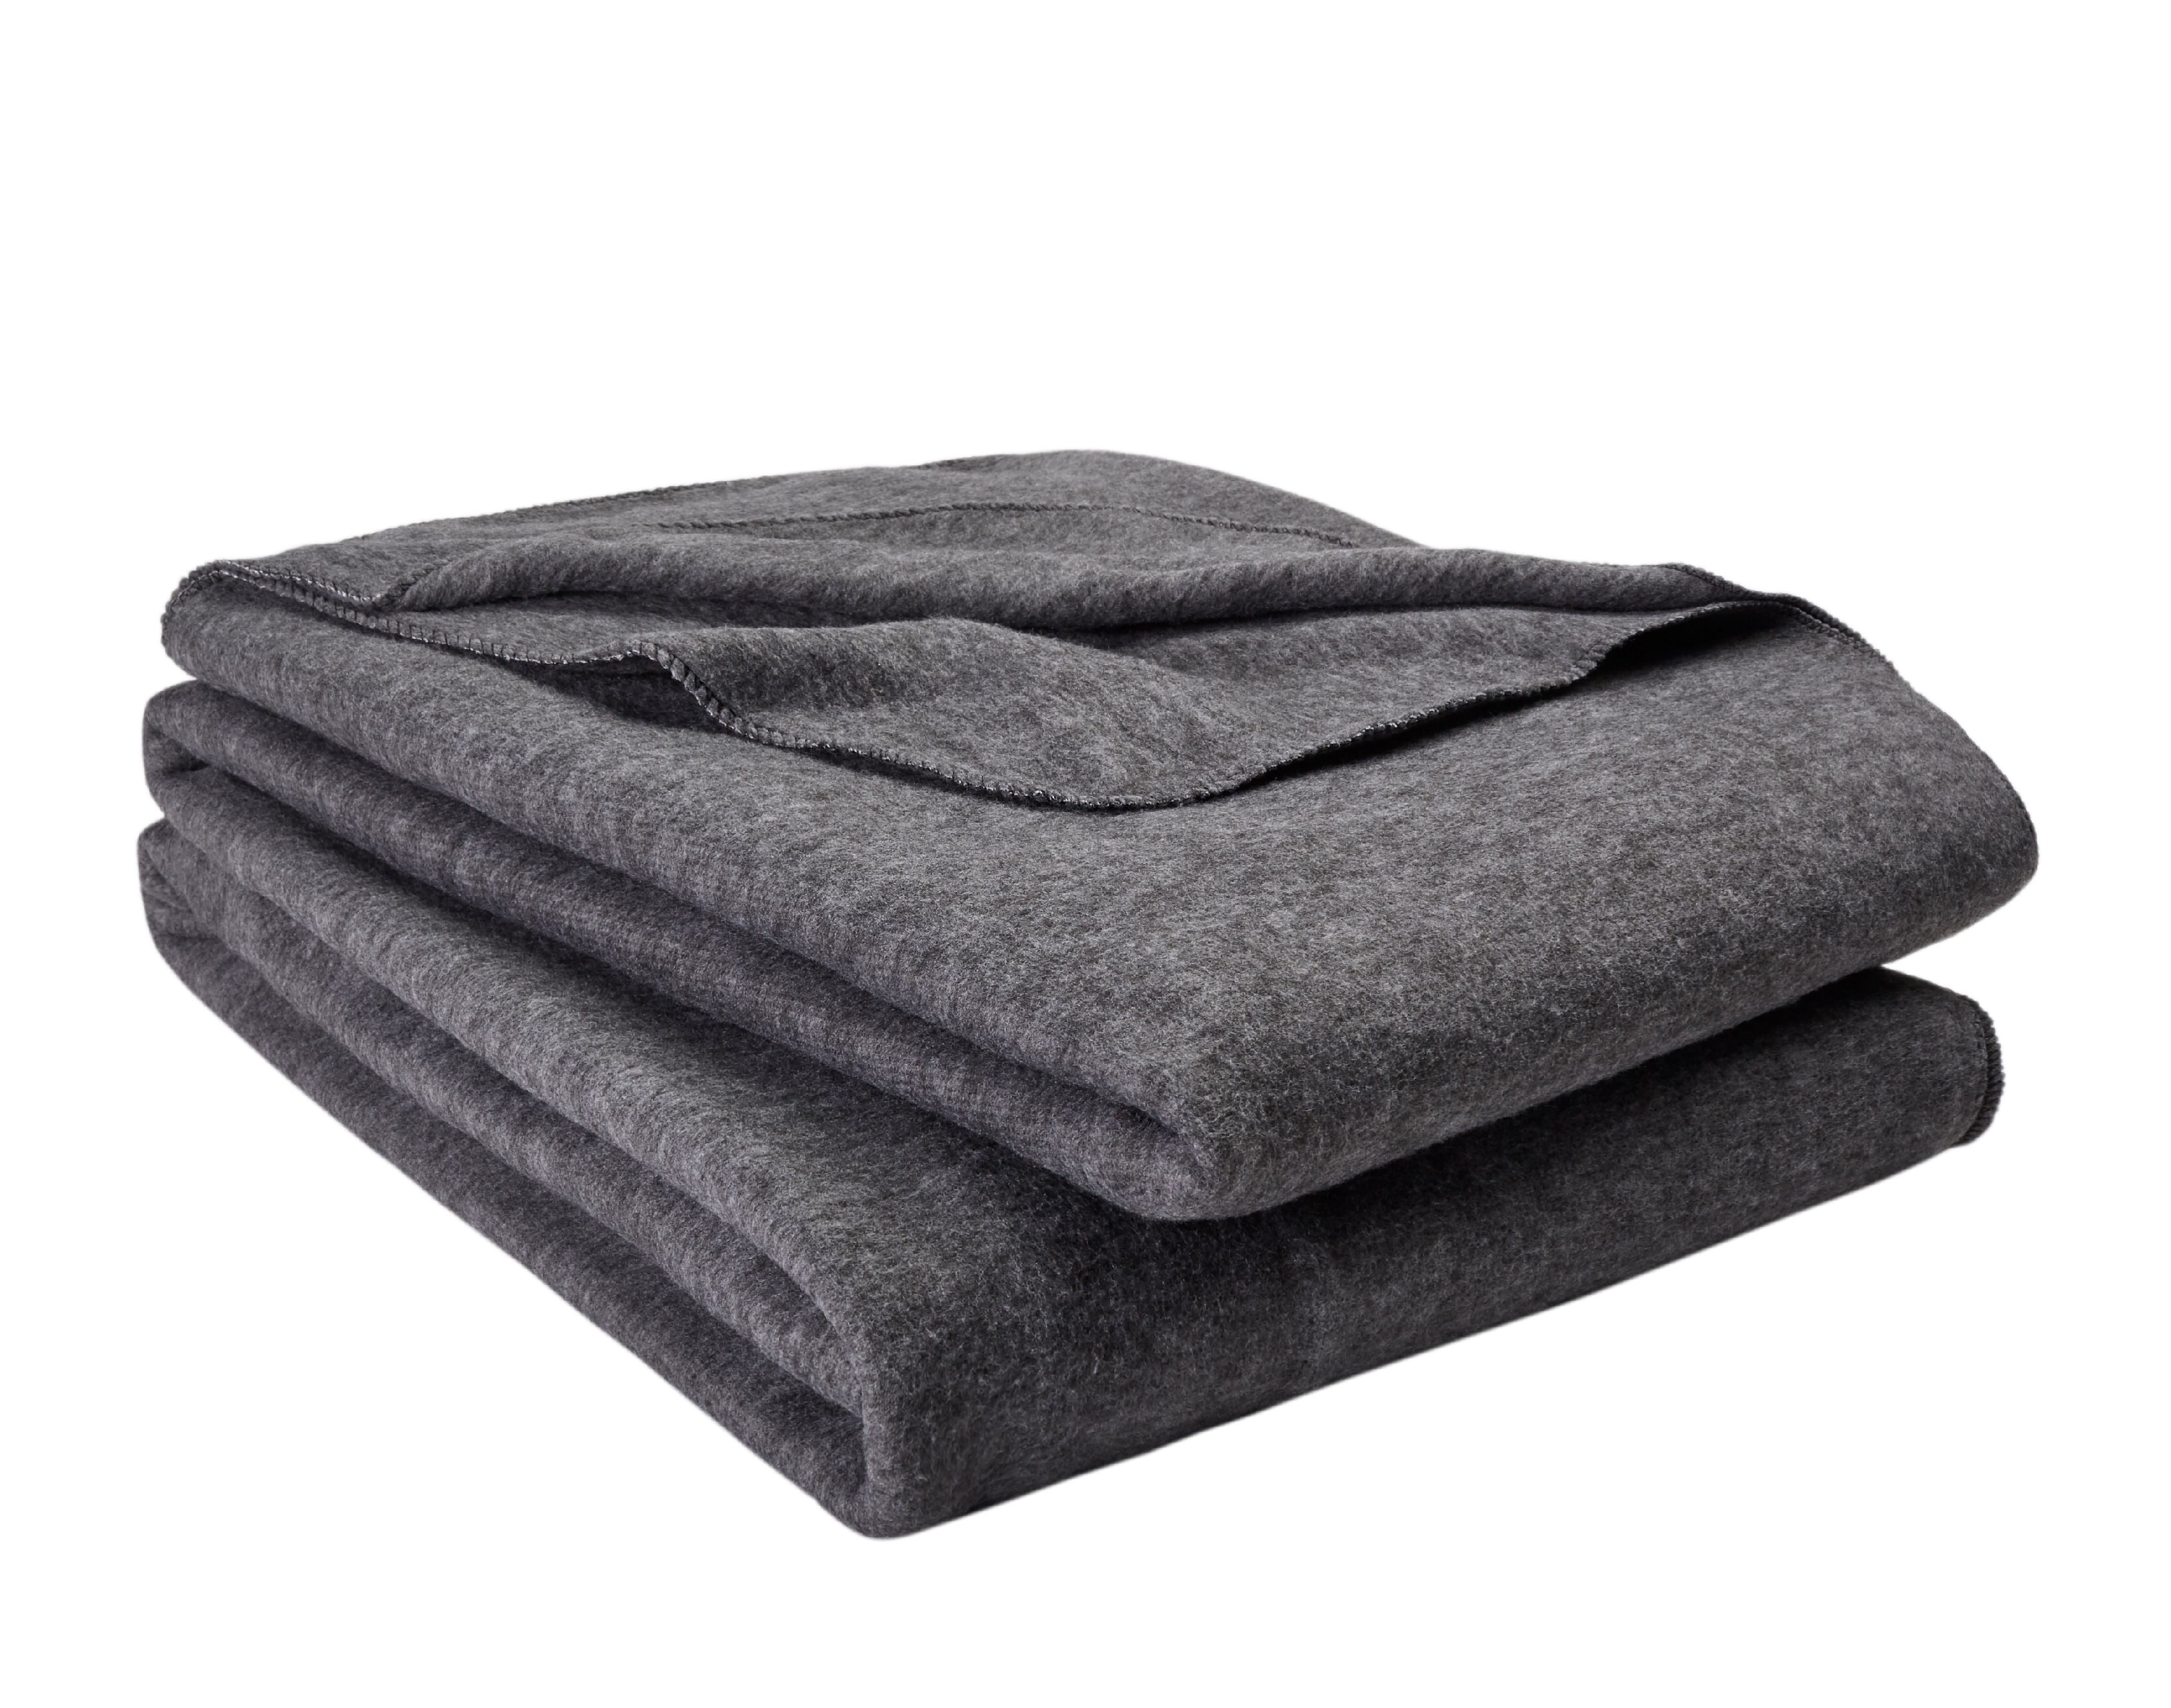 SOFTCARE Fleece Bed Blanket, All-Season,Anti-Static,Thicken 350GSM Warm  Fuzzy Blanket Lightweight Thermal Blanket for Couch,Bed,and Sofa-Dark Grey